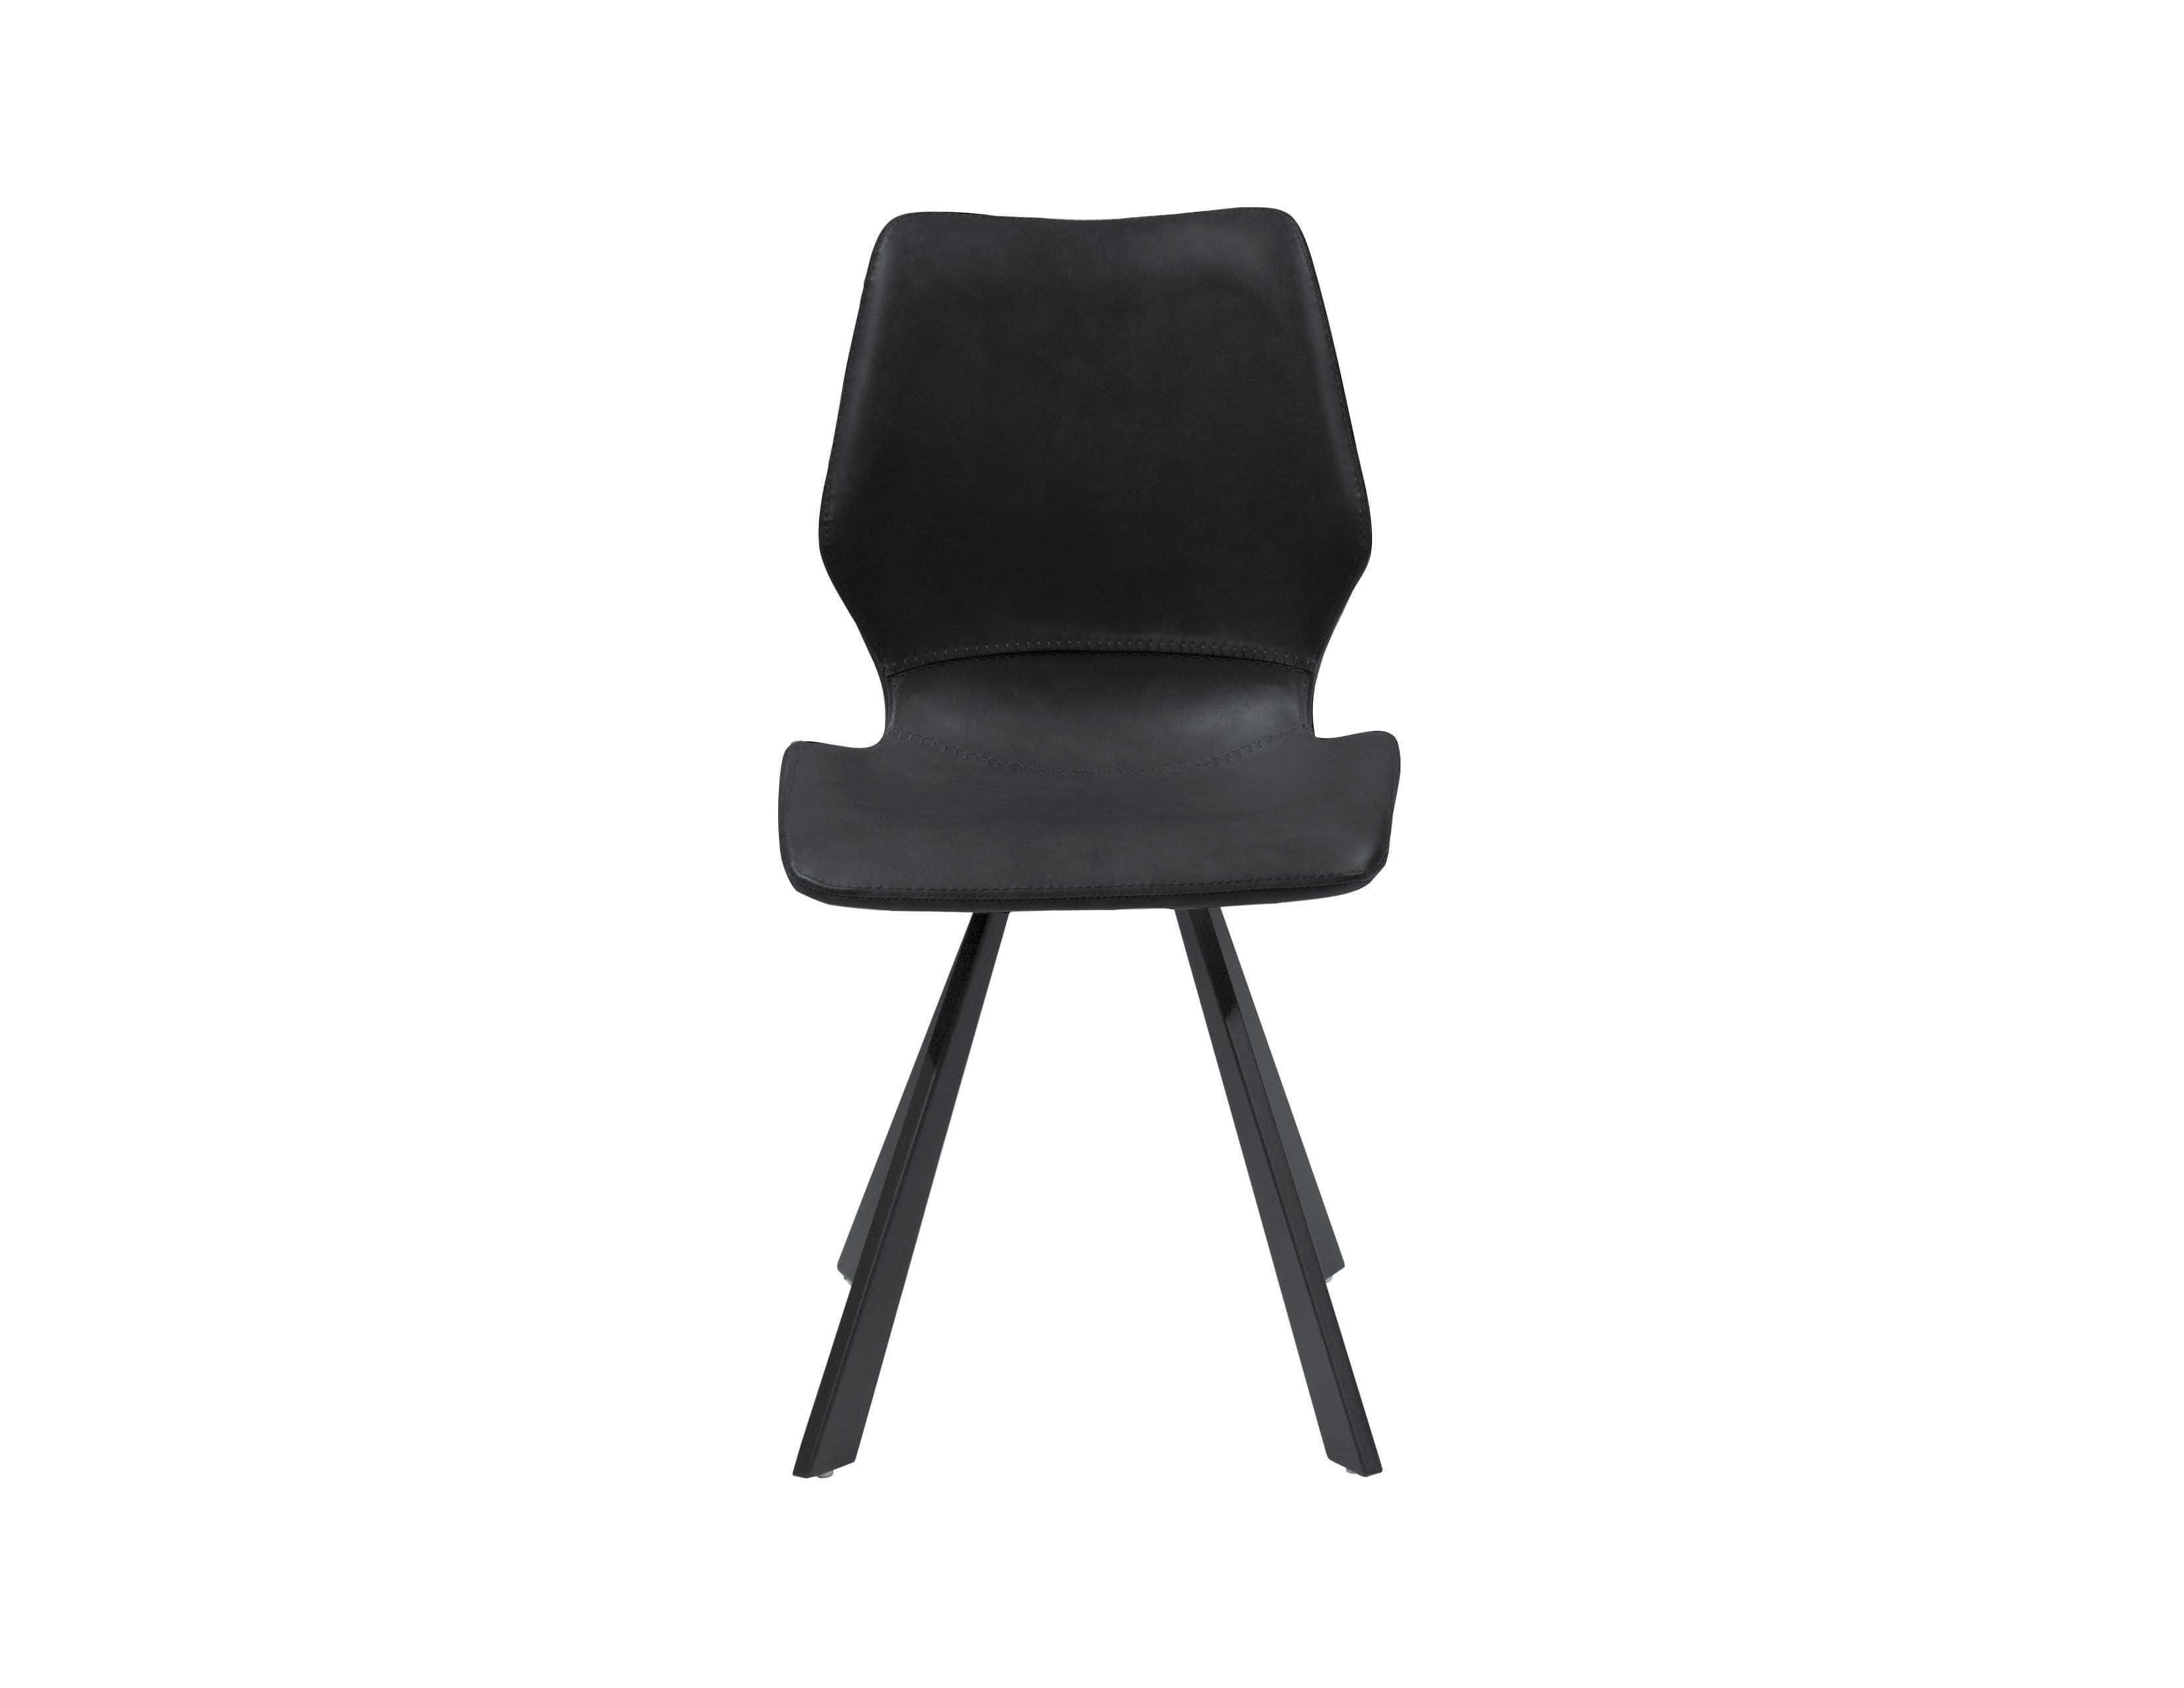 Bernadette Leatherette Dining Chair with Black Powder Coated Metal (Set Of 2) - Available in 2 Colours